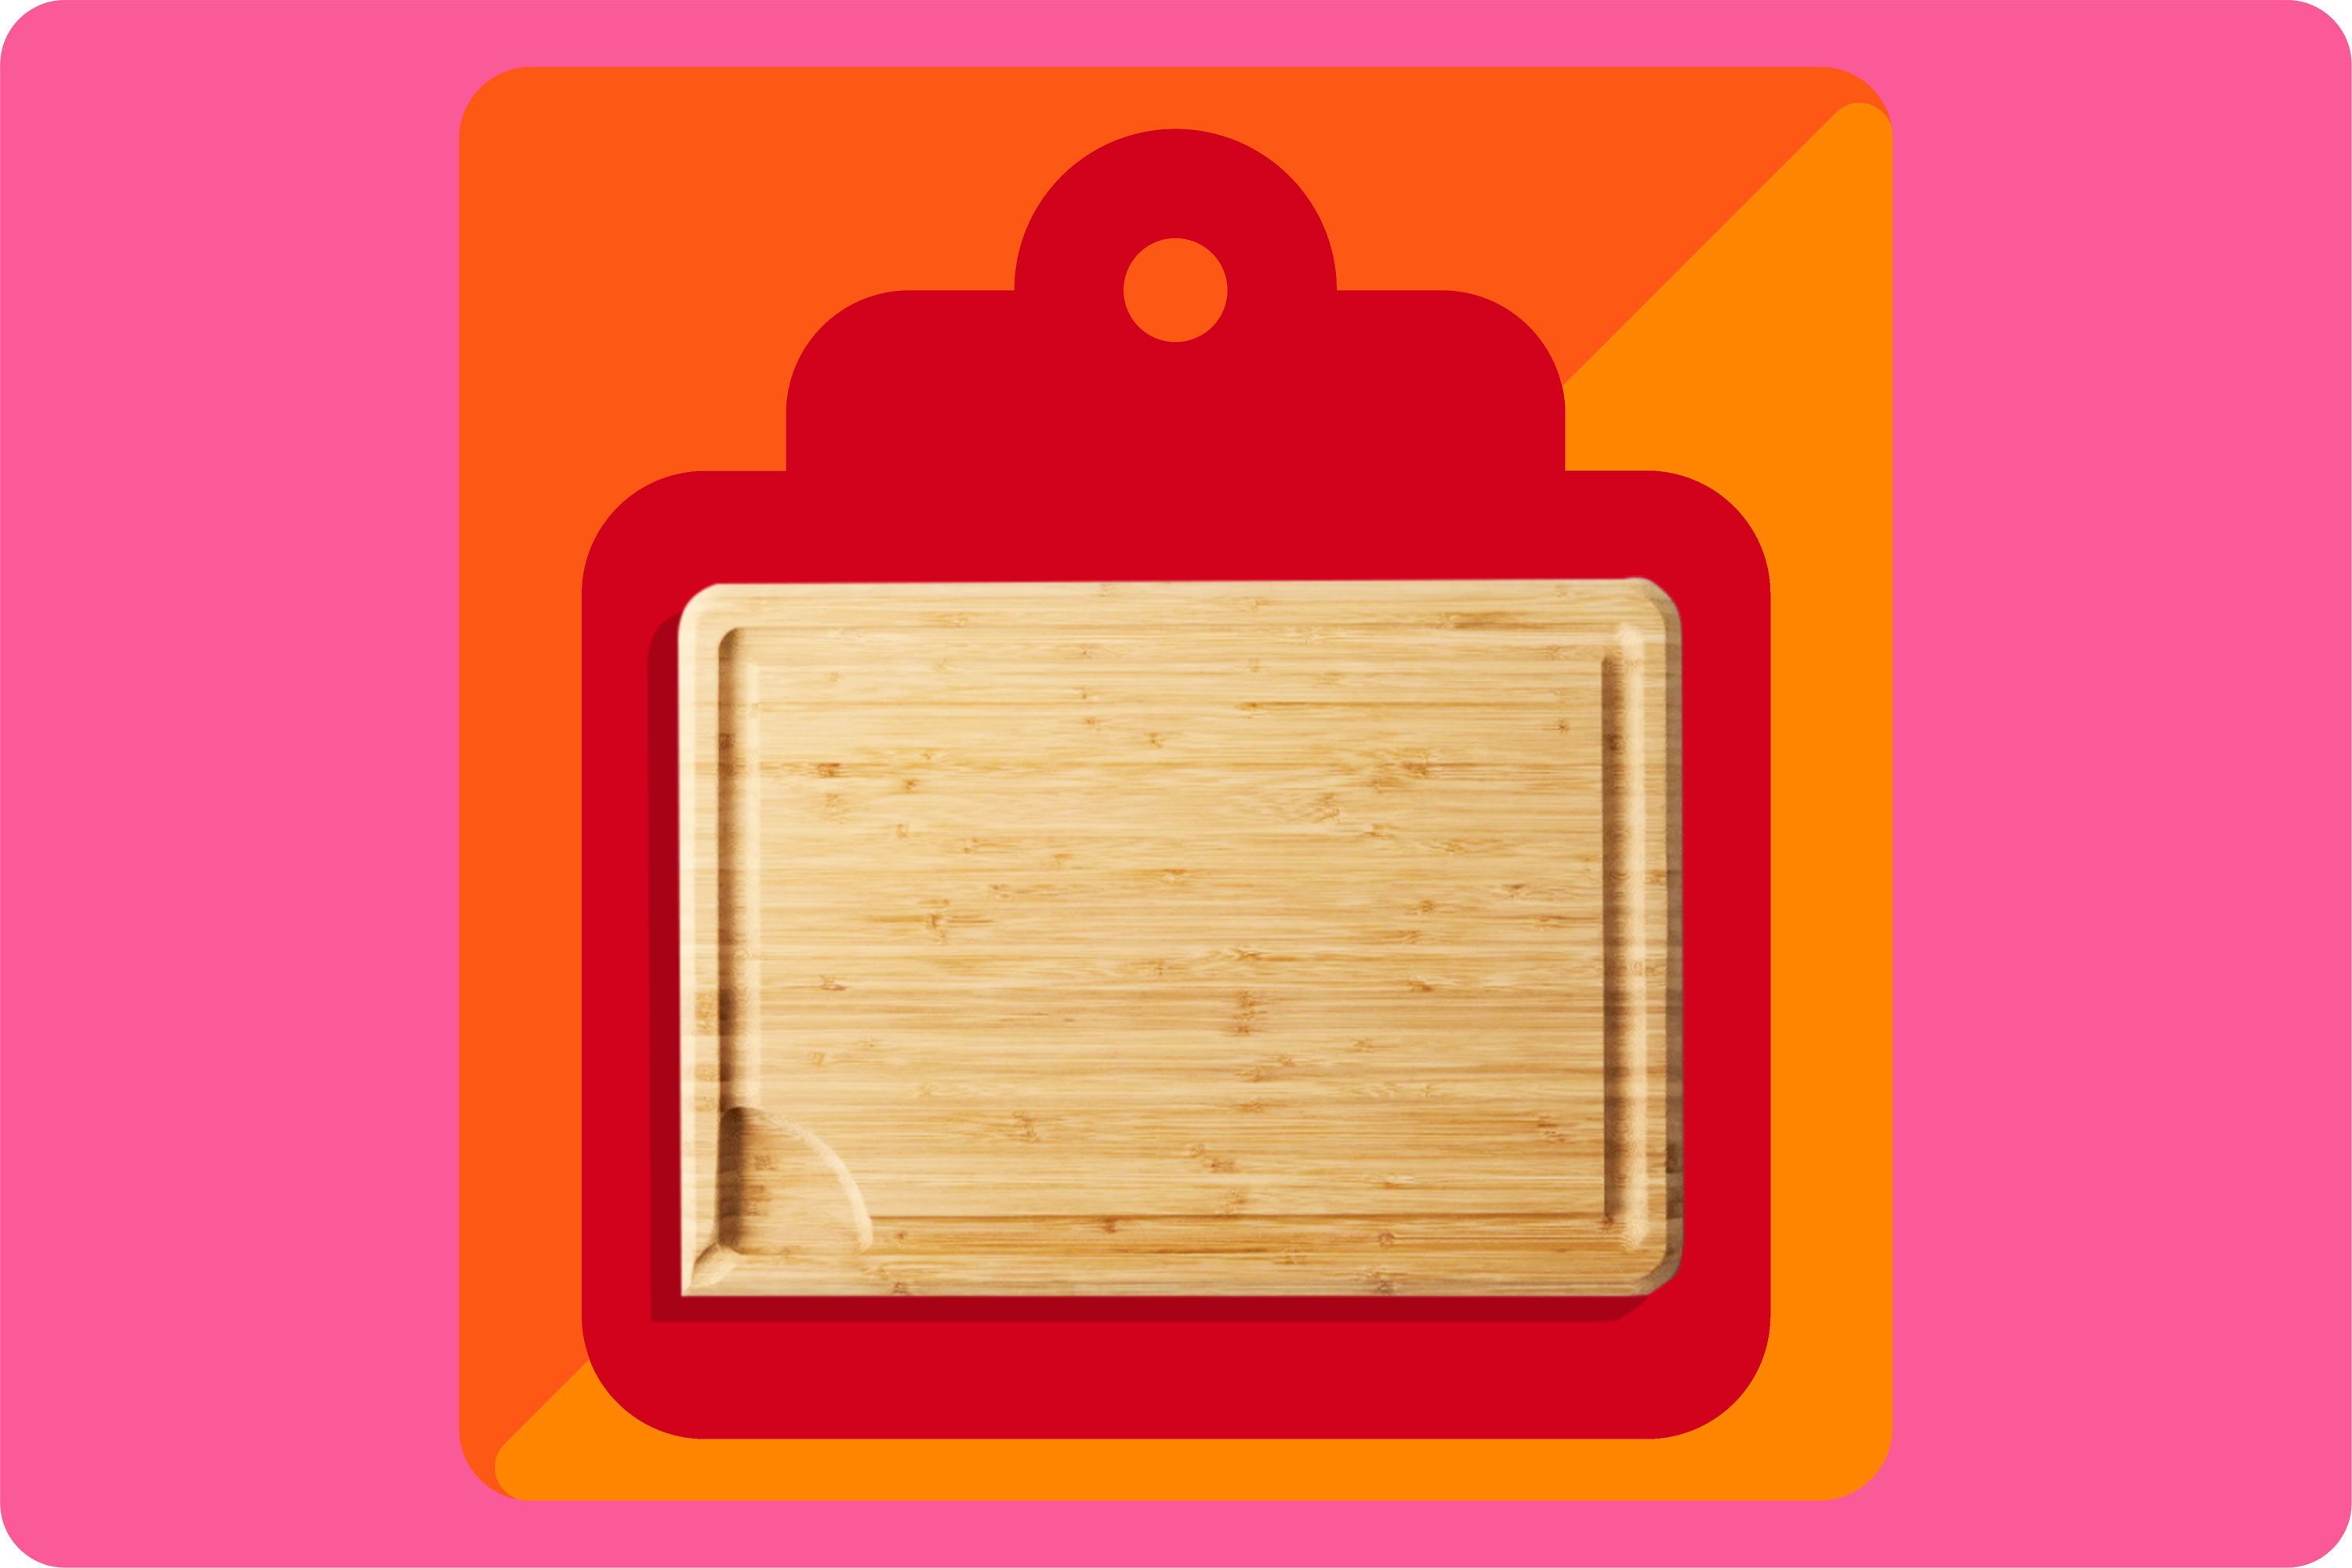 Five Two Bamboo Double Sided Cutting Board | Medium by Schoolhouse